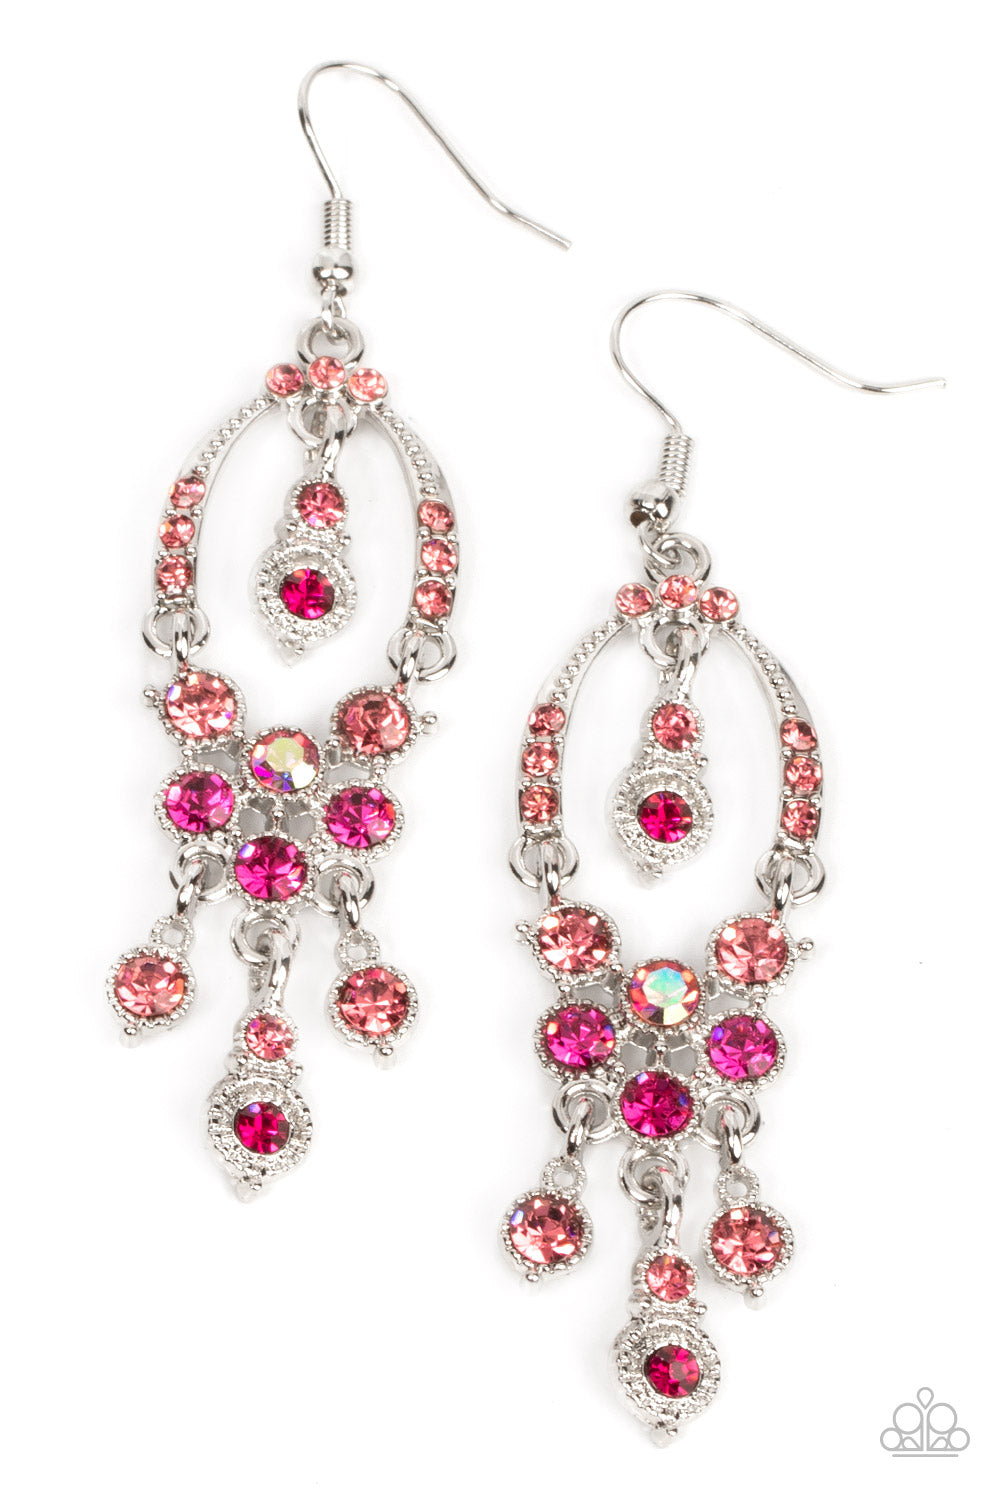 Sophisticated Starlet Paparazzi Accessories Earrings Pink